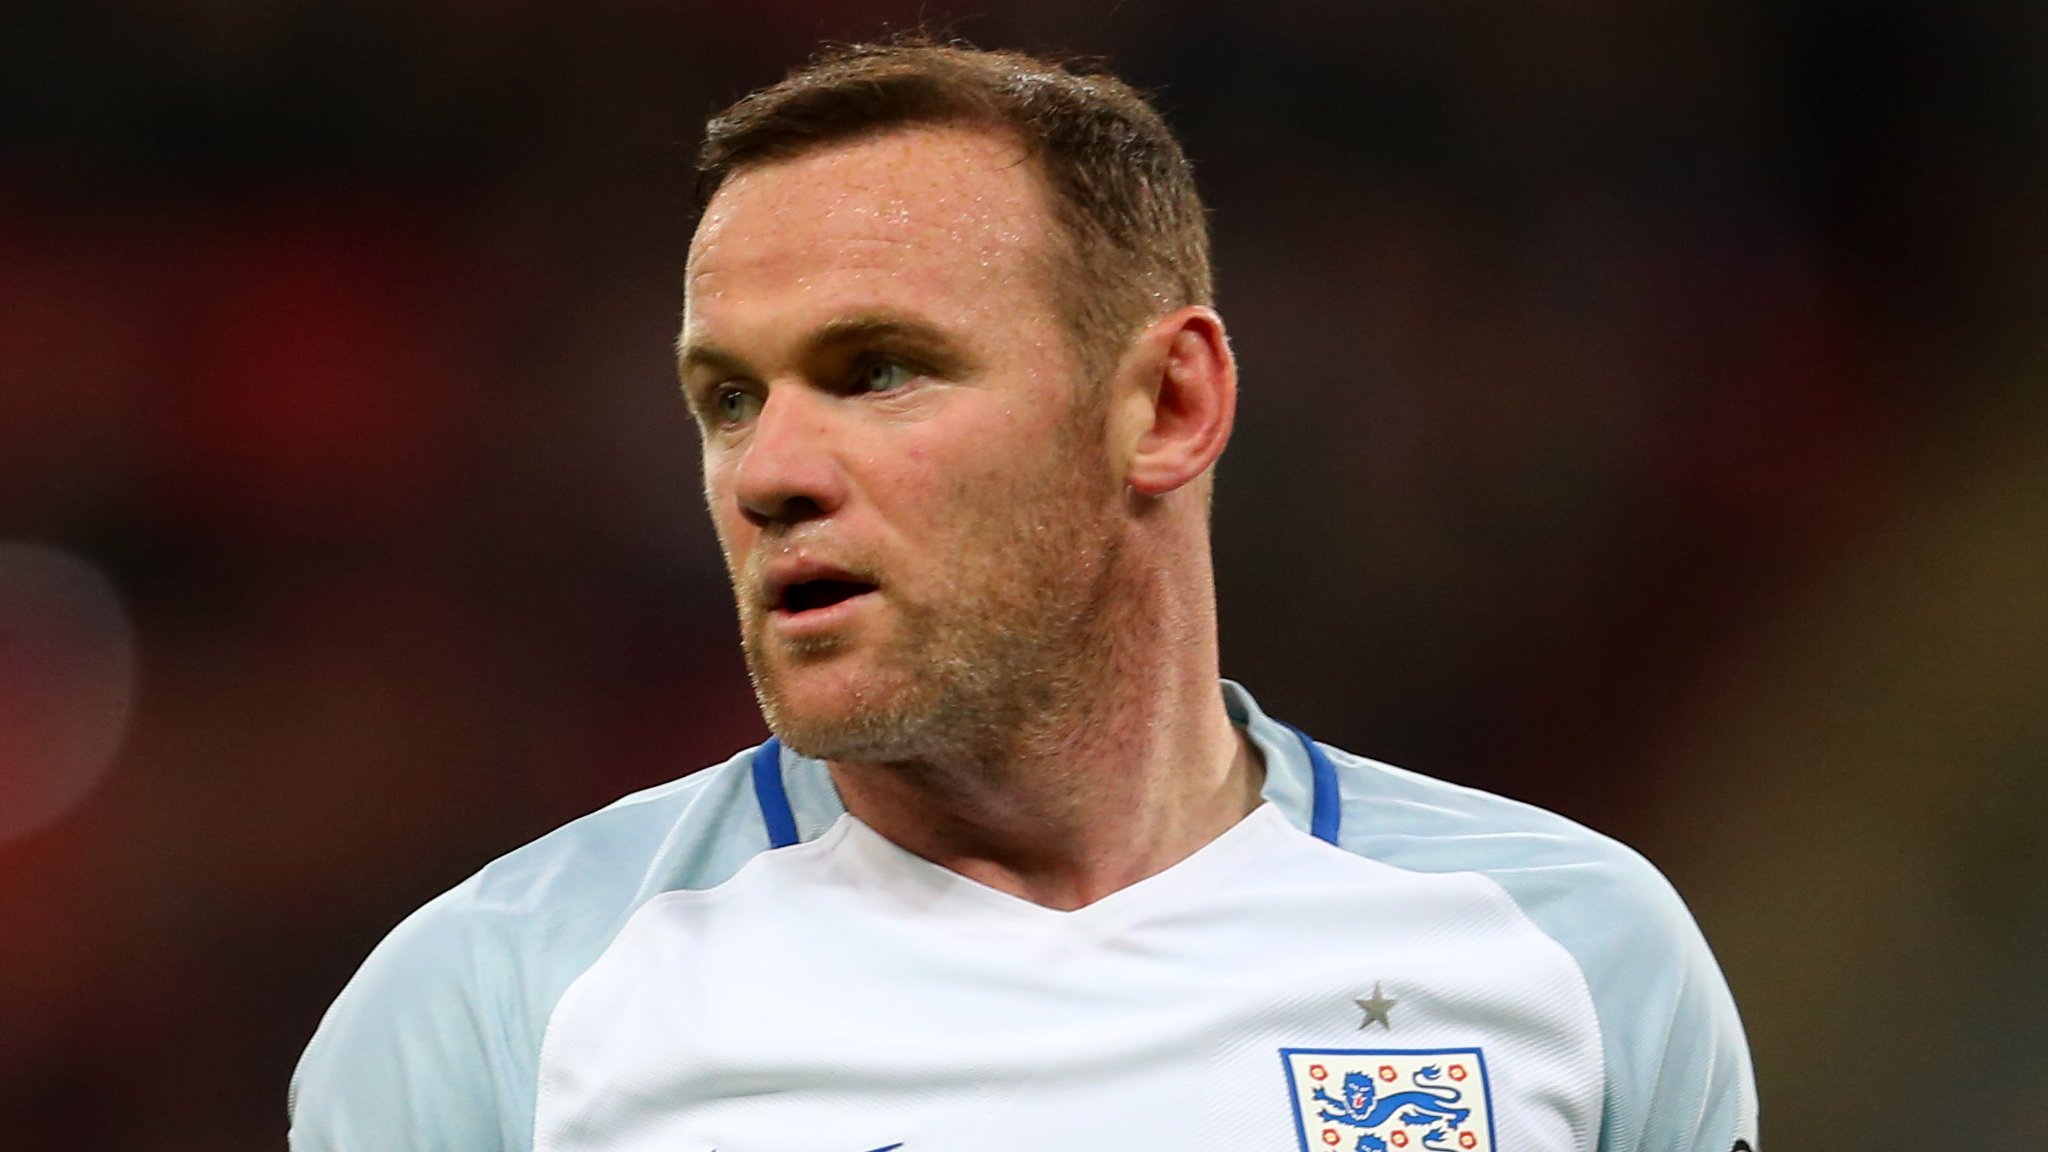 Wayne Rooney: England and Man Utd striker will not face FA charge